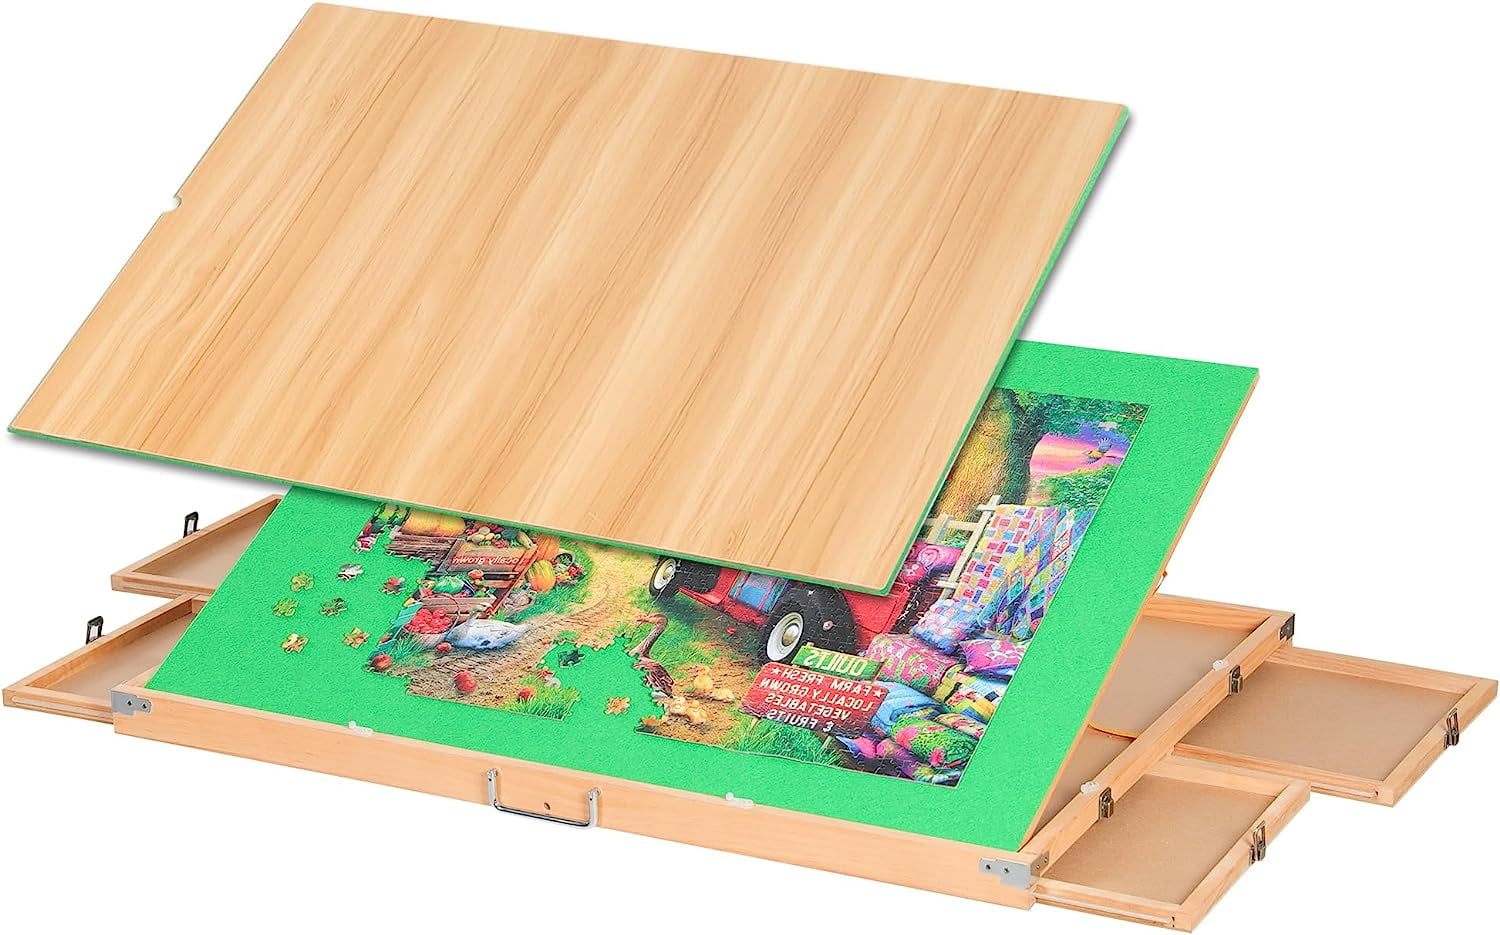 Jumbo Wooden Jigsaw Puzzle Board Portable Puzzle Plateau with